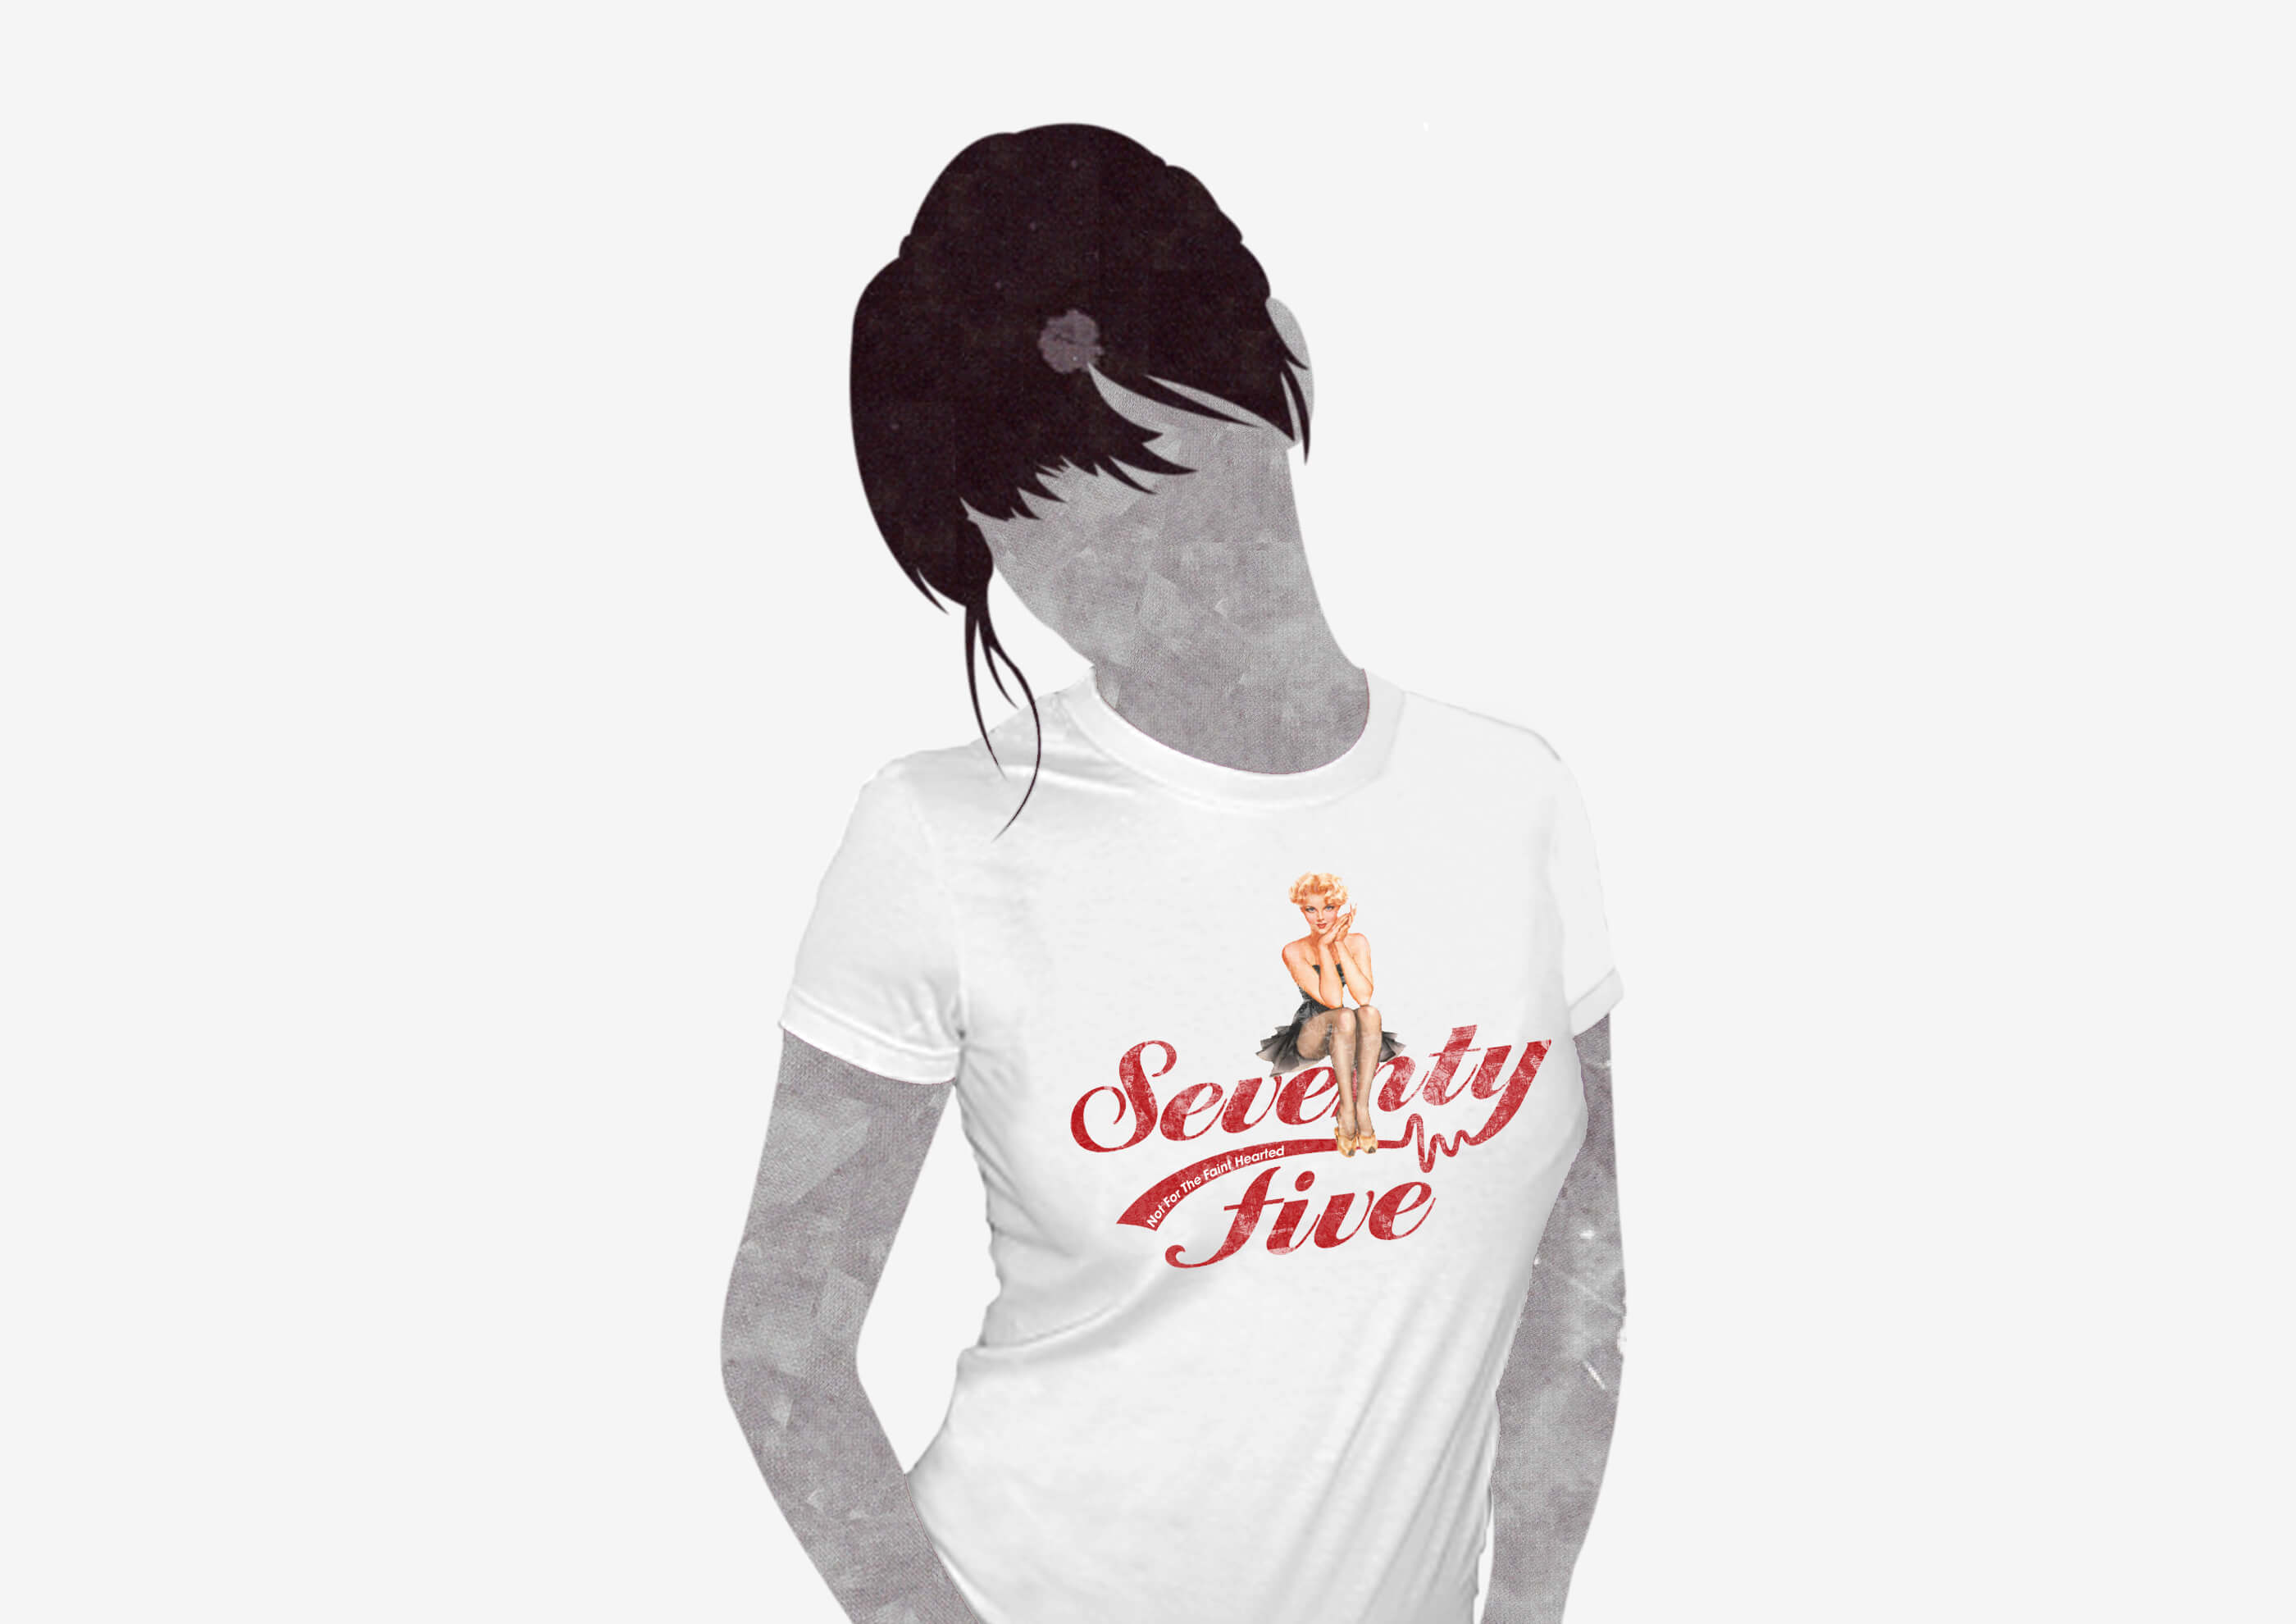 Illustration of a female model with concrete skin and black hair, wearing a white tee of the main Seventy Five logo in dark red